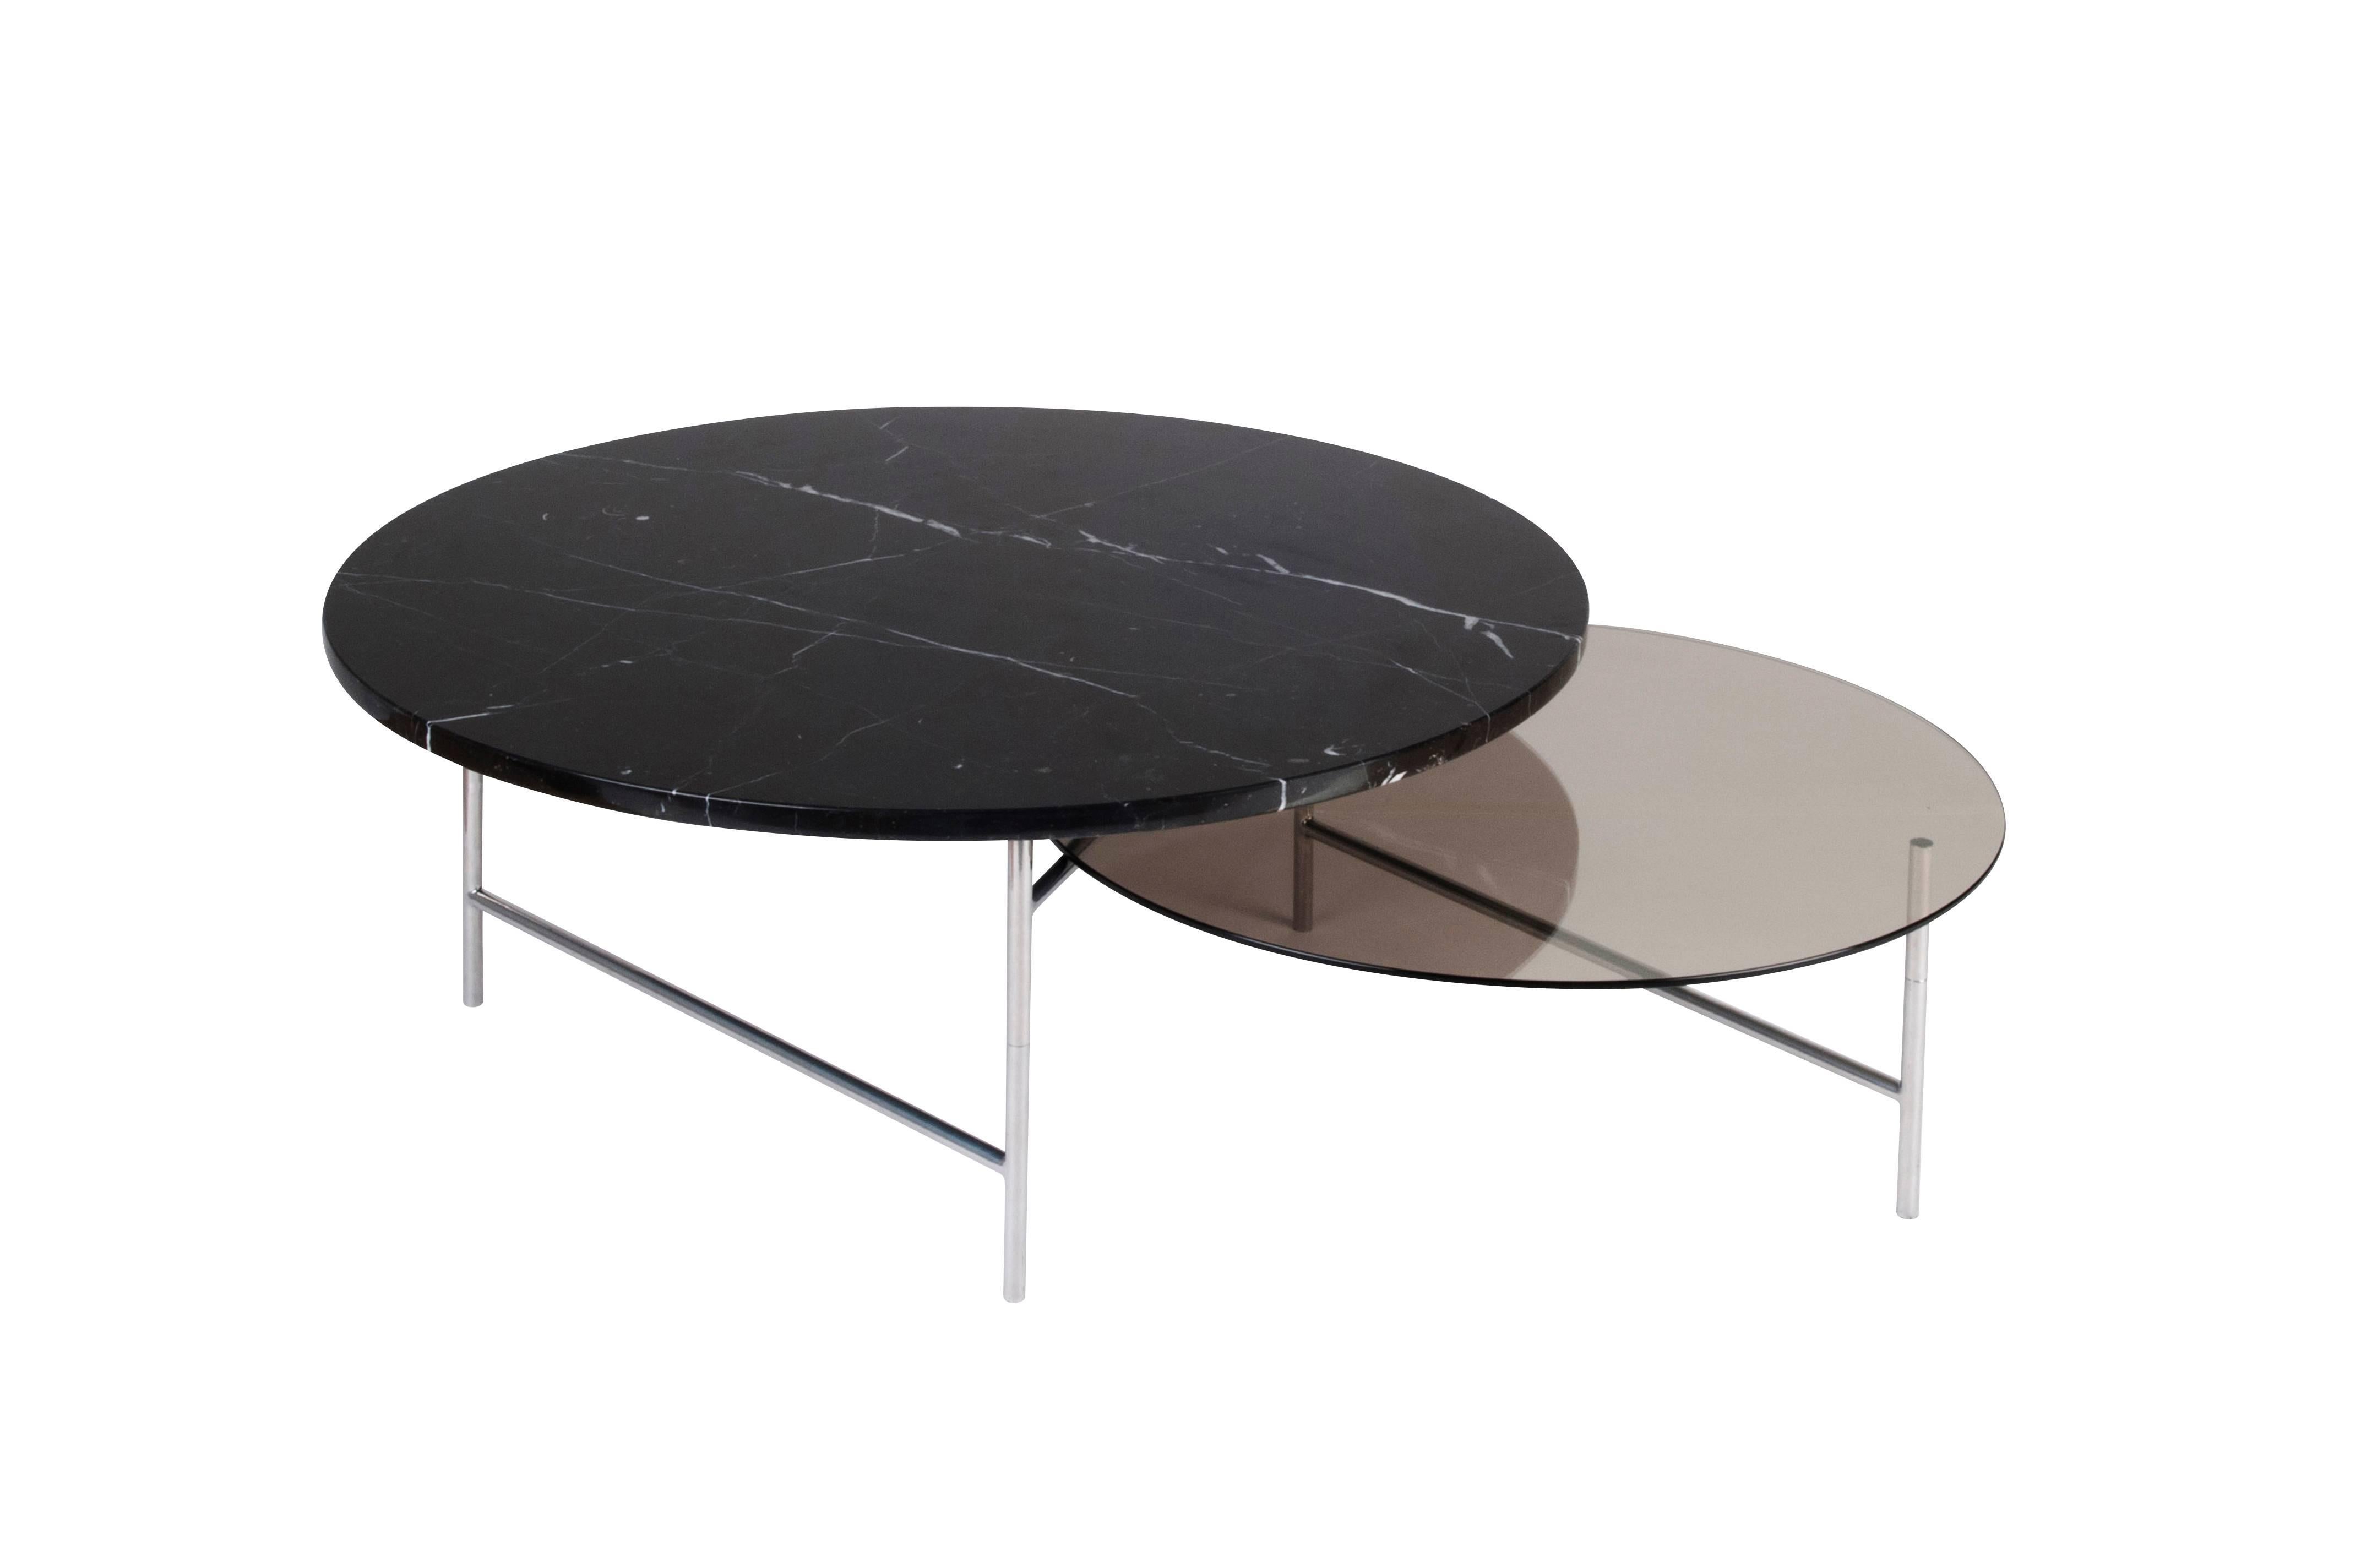 Zorro is a coffee table. It’s Minimalist and ingenious Z-structure supports two overlapping trays reflecting one another. This very graphical table gives an impression of lightness and of movement. Zorro can also be combined and grow